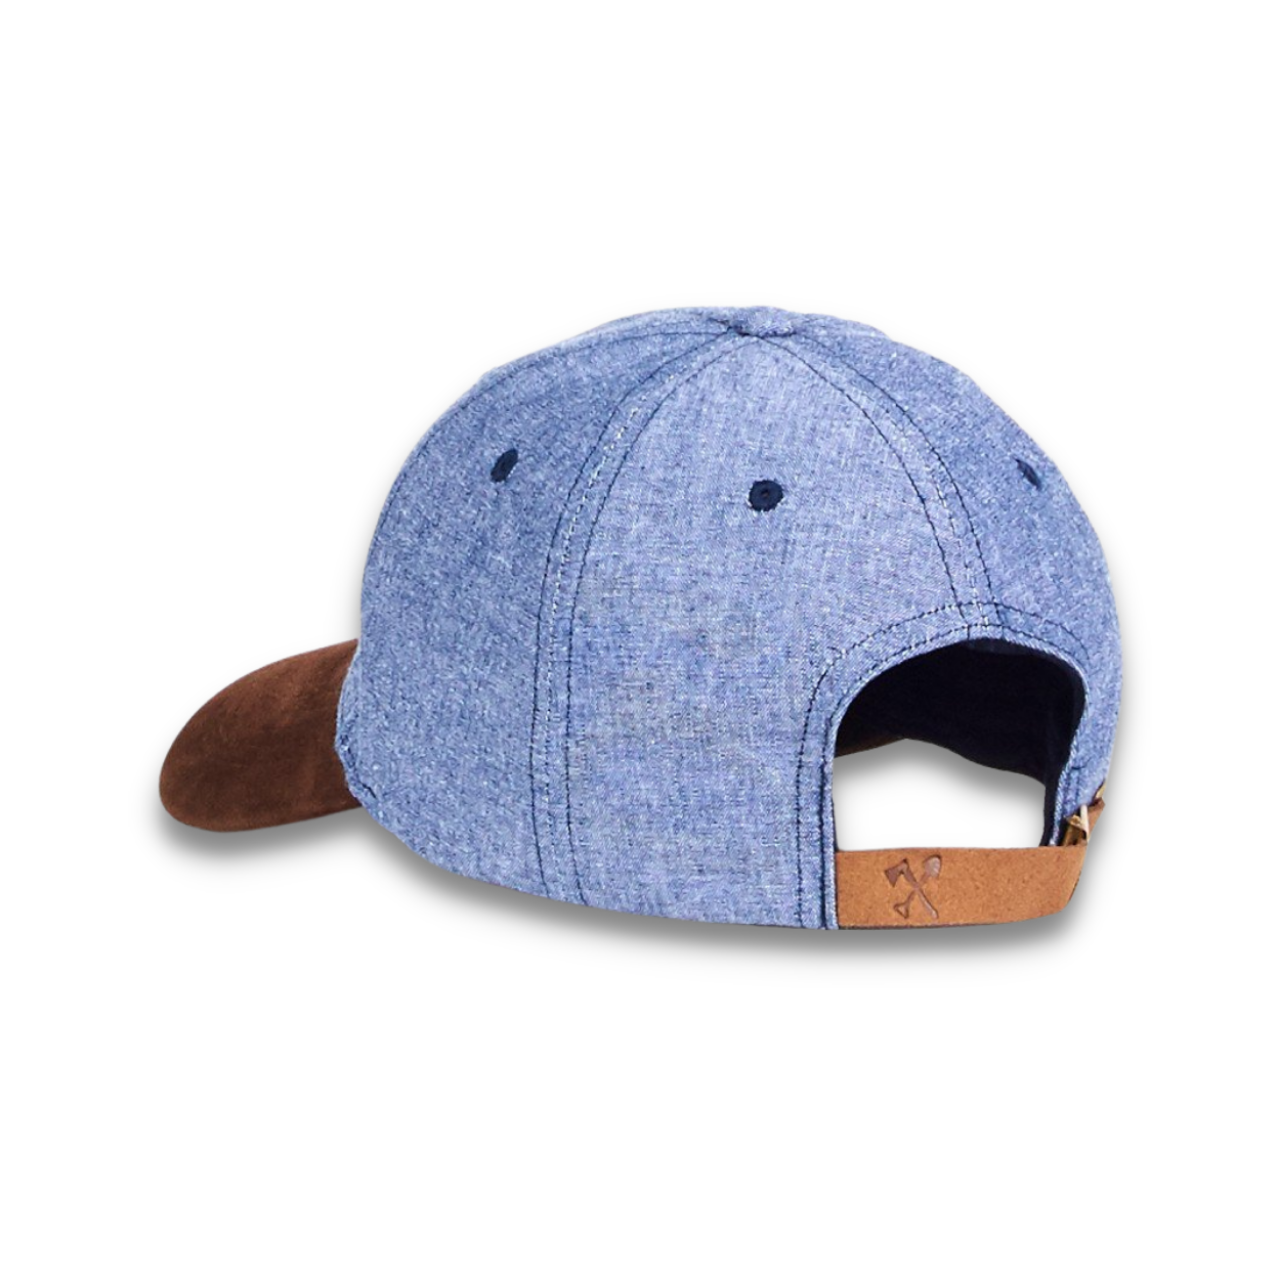 Chambray Dad Hat - Light Blue & Brown